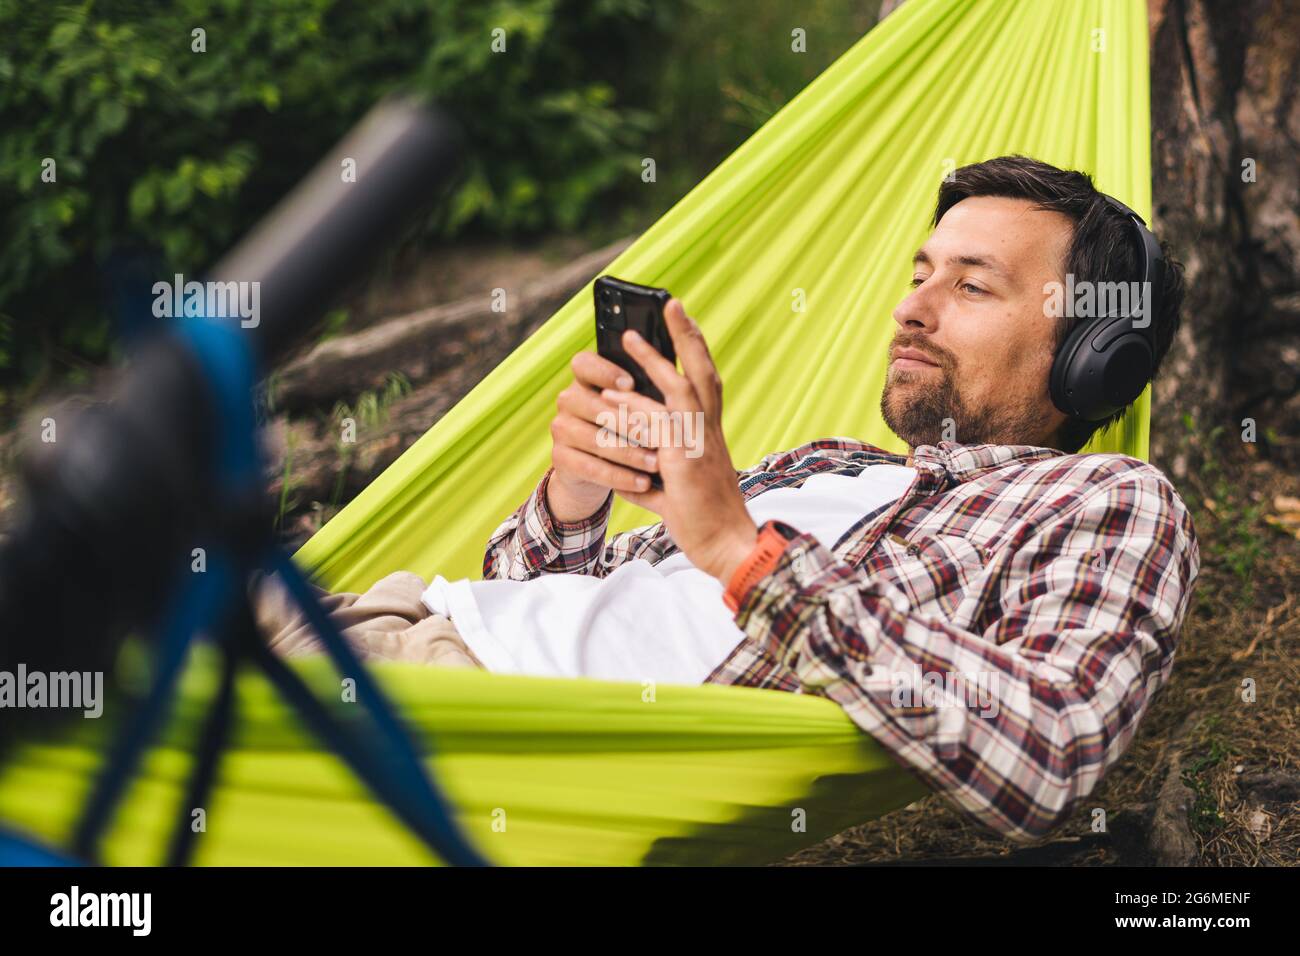 Man on bicycle trip at camping by lake is relaxing in green hammock while listening to music. Active recreation theme in nature. Hipster cyclist with Stock Photo